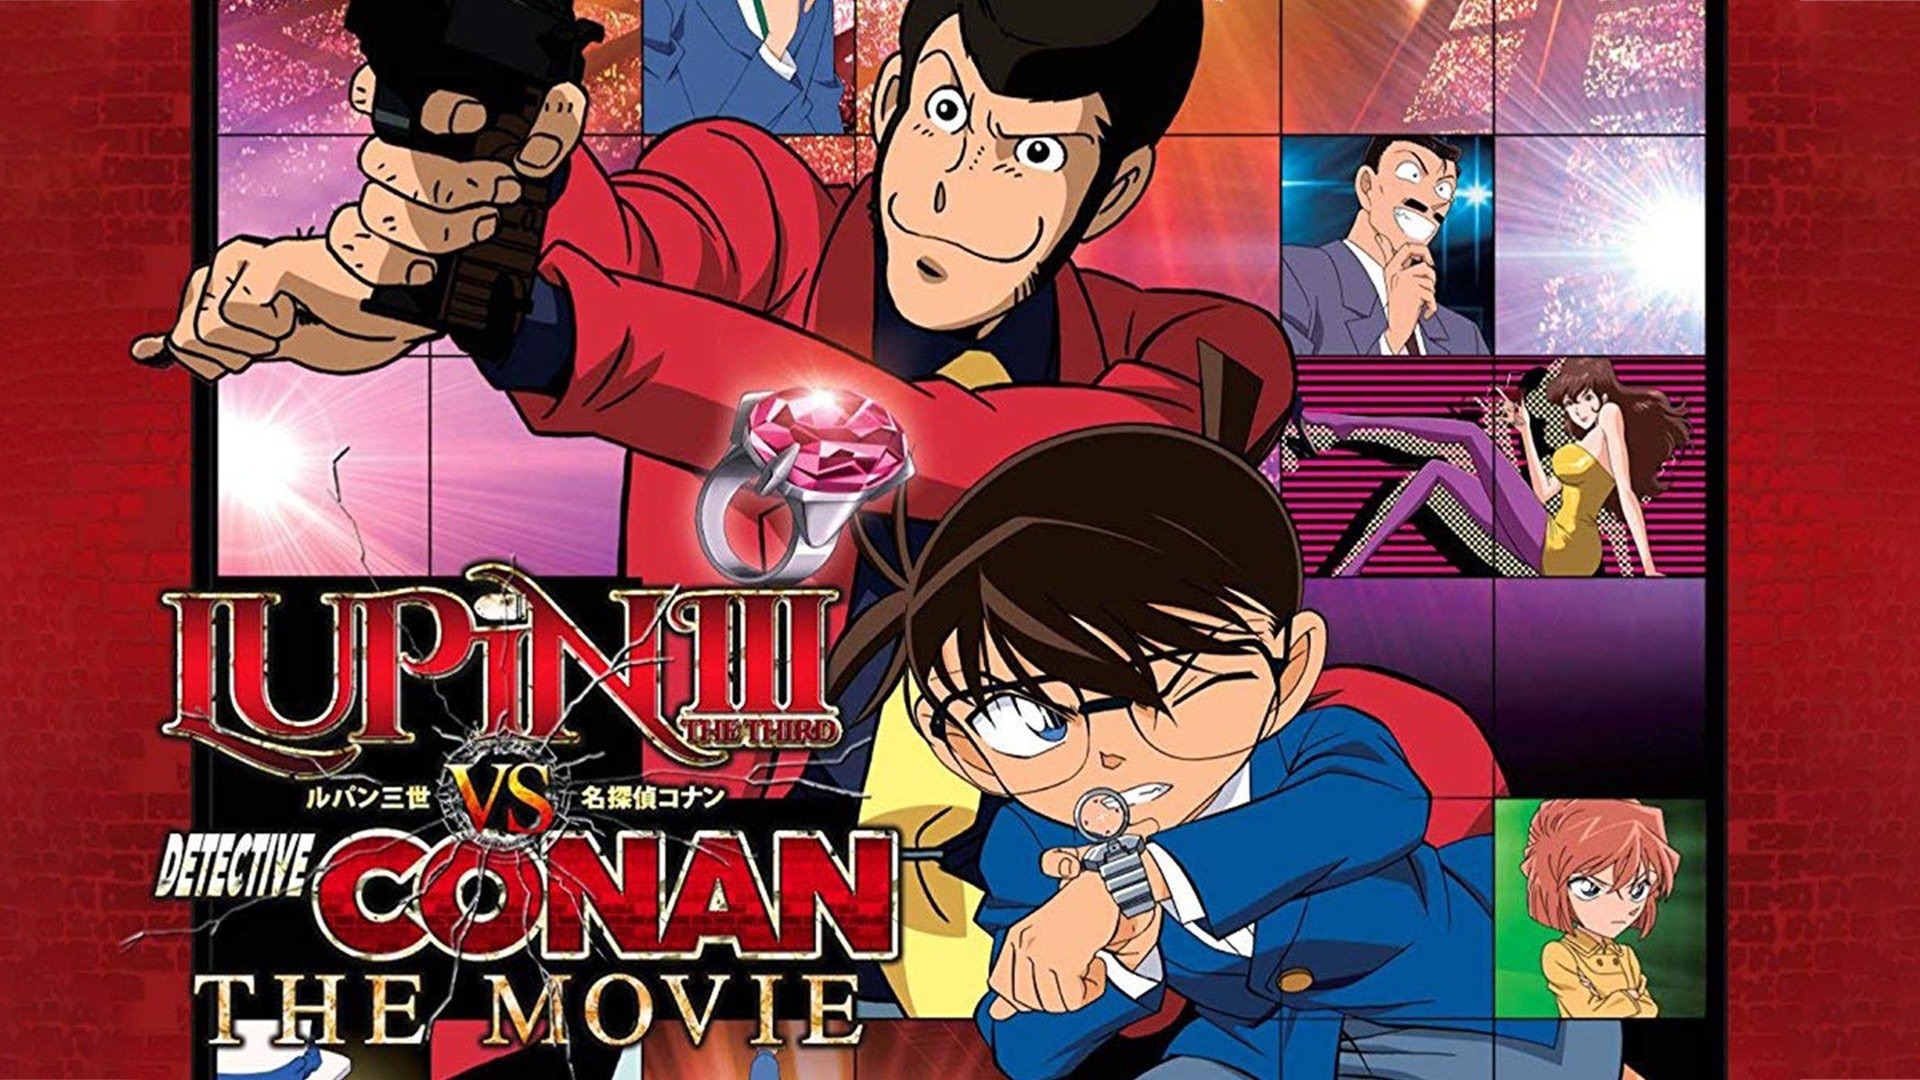 Lupin the 3rd vs. Detective Conan The Movie Apple TV